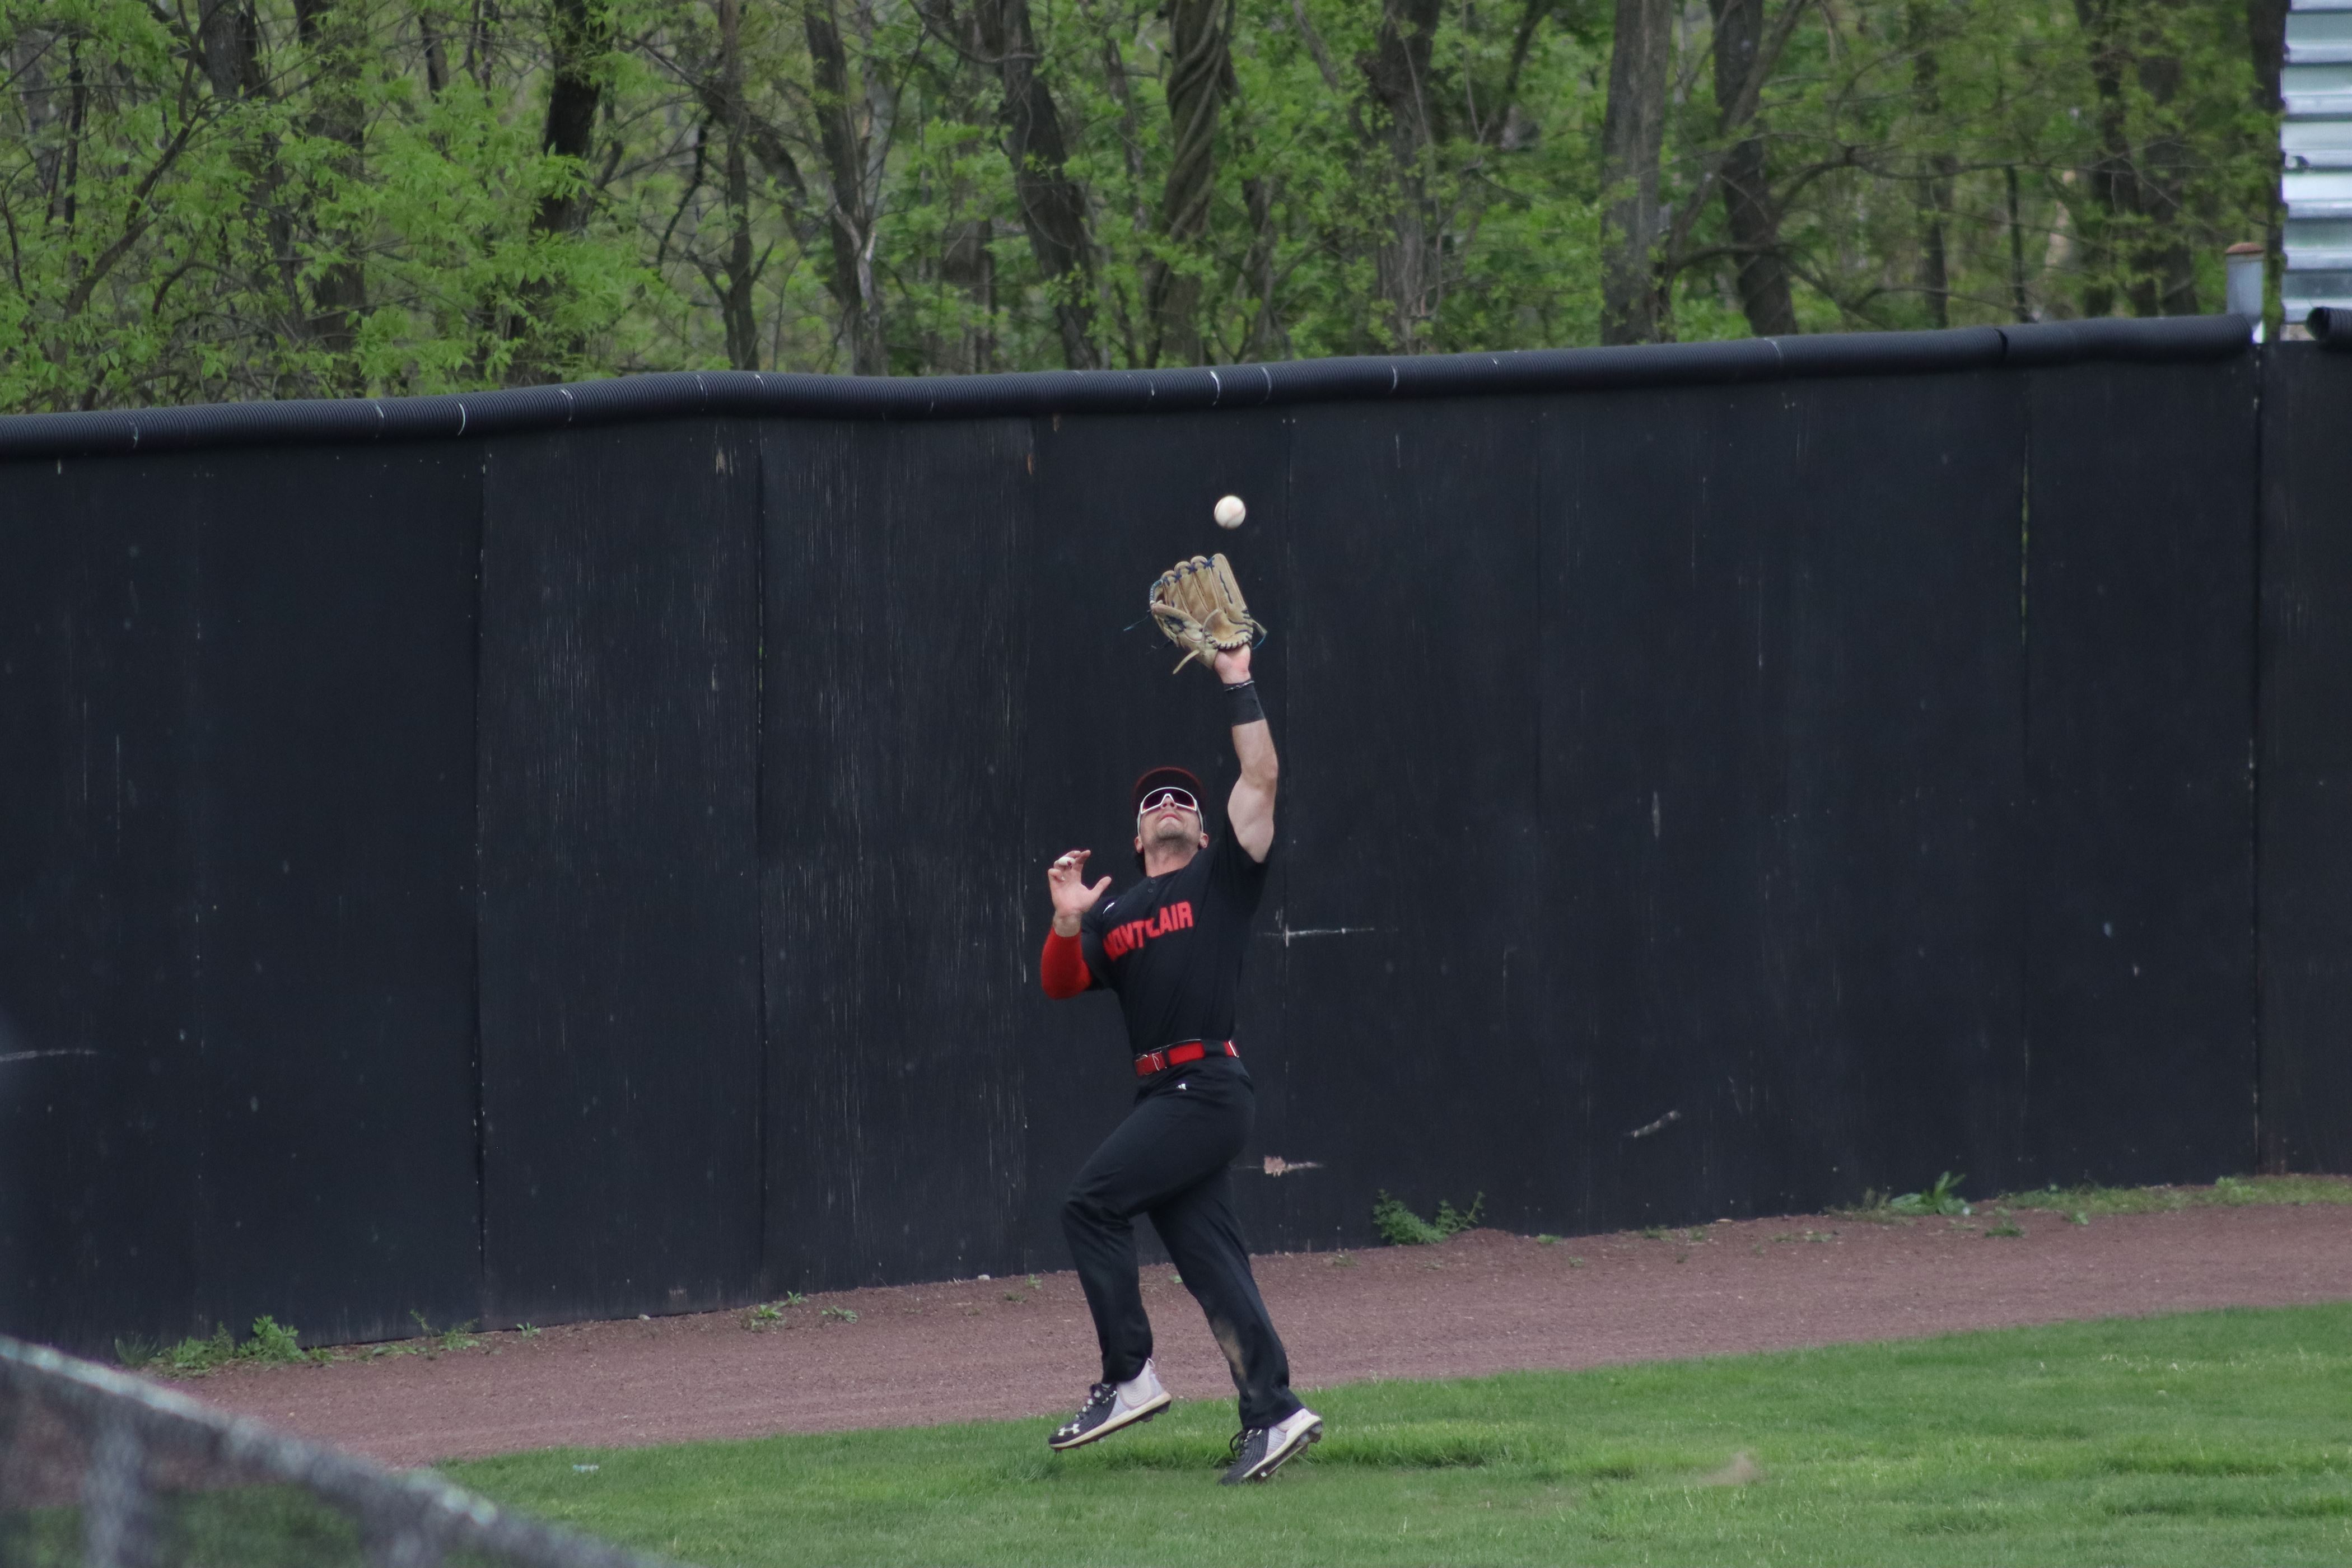 The Red Hawks make a great catch deep in the outfield. Trevor Giesberg | The Montclarion